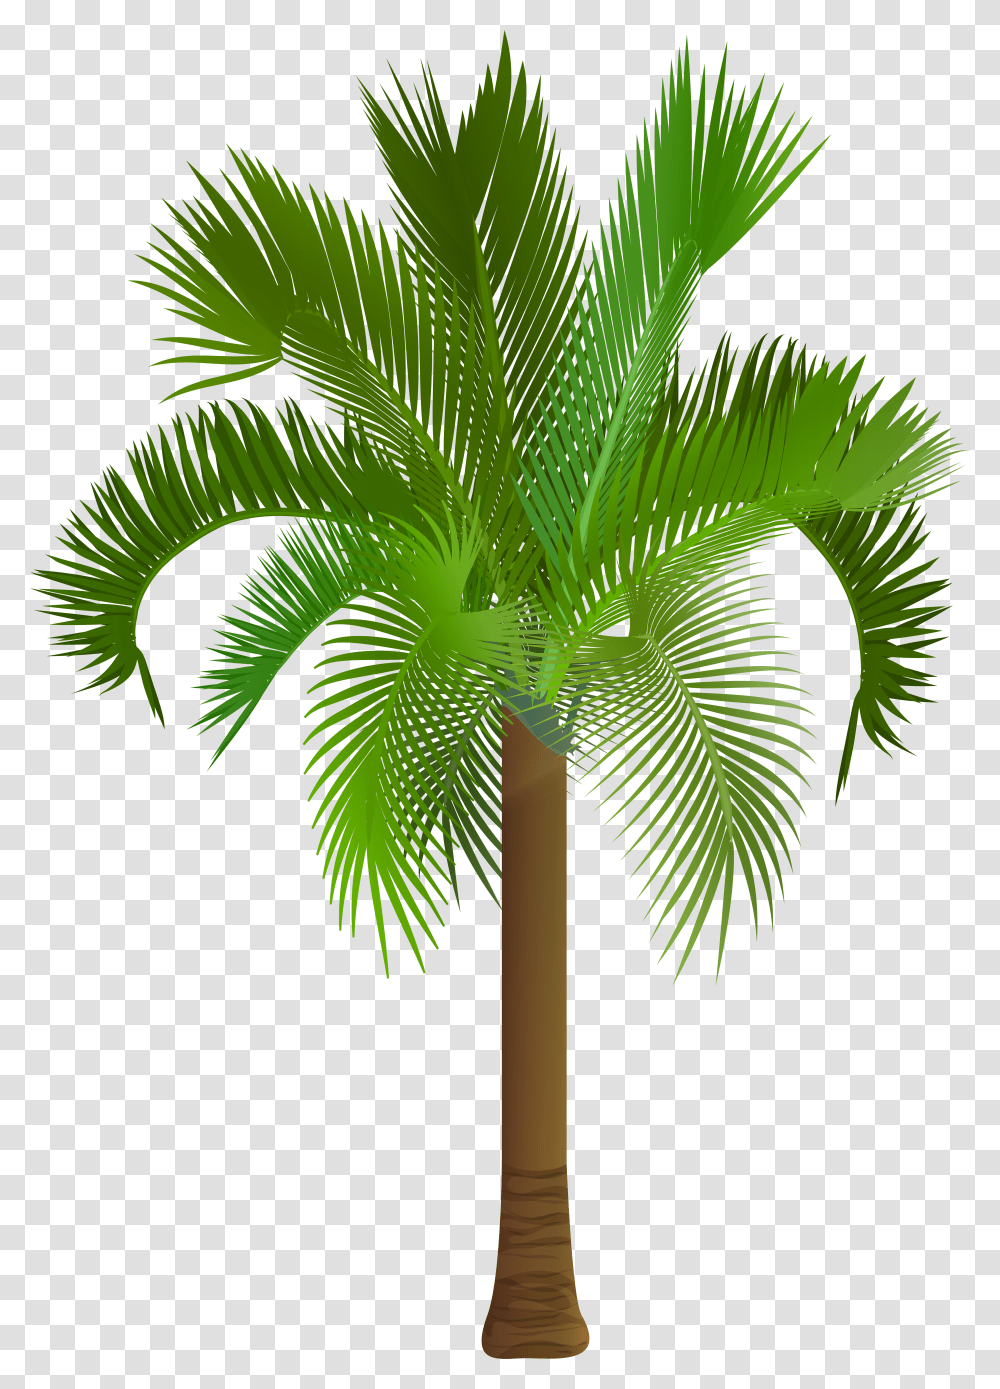 Palm Tree Clip Art Image Is Available For Free Palm Tree Free Royalty Transparent Png